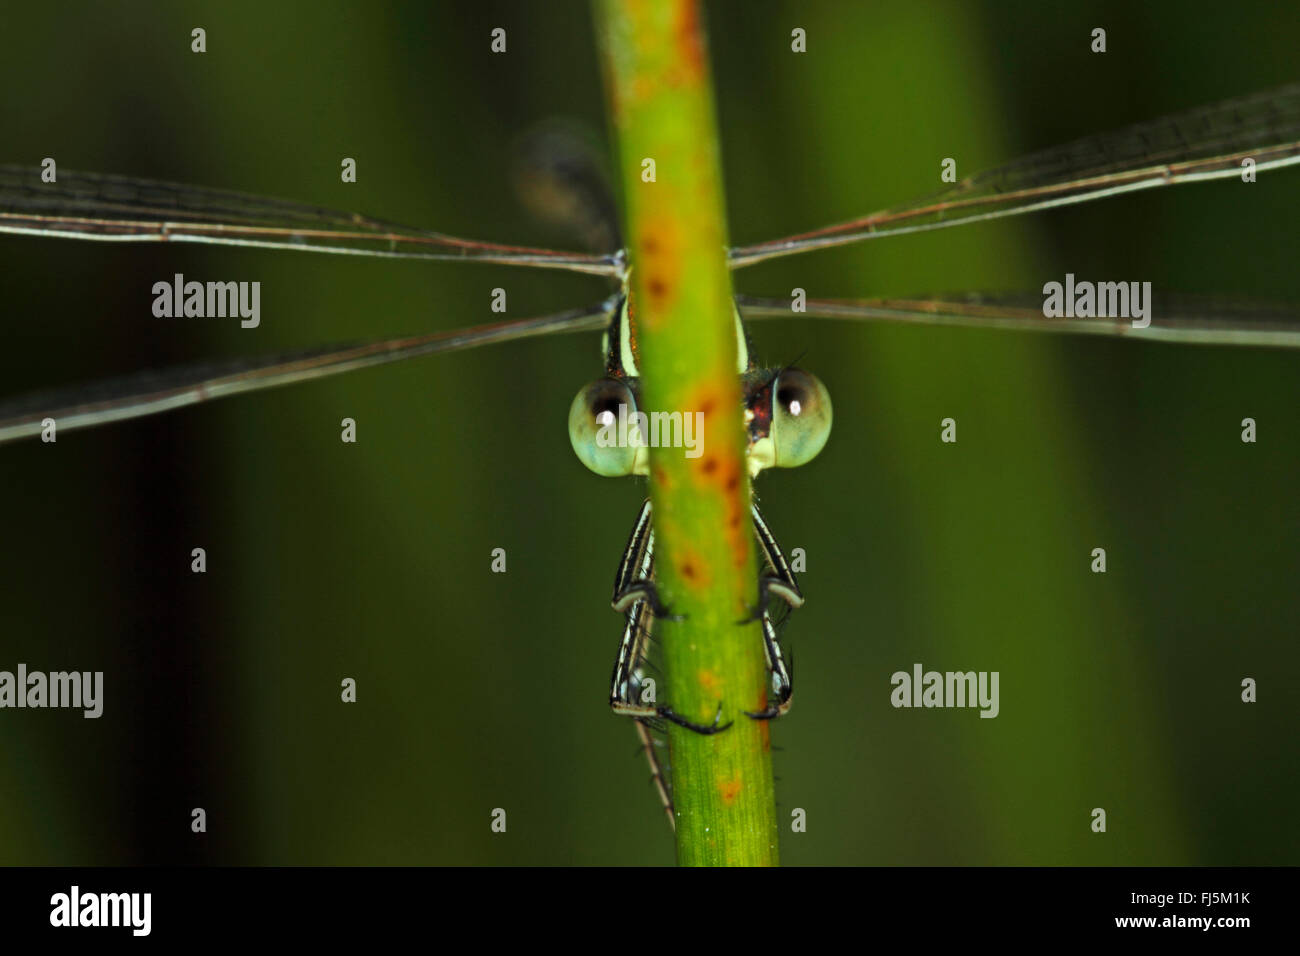 Migrant spreadwing, Southern emerald damselfly (Lestes barbarus), peeping out a stem, Germany Stock Photo